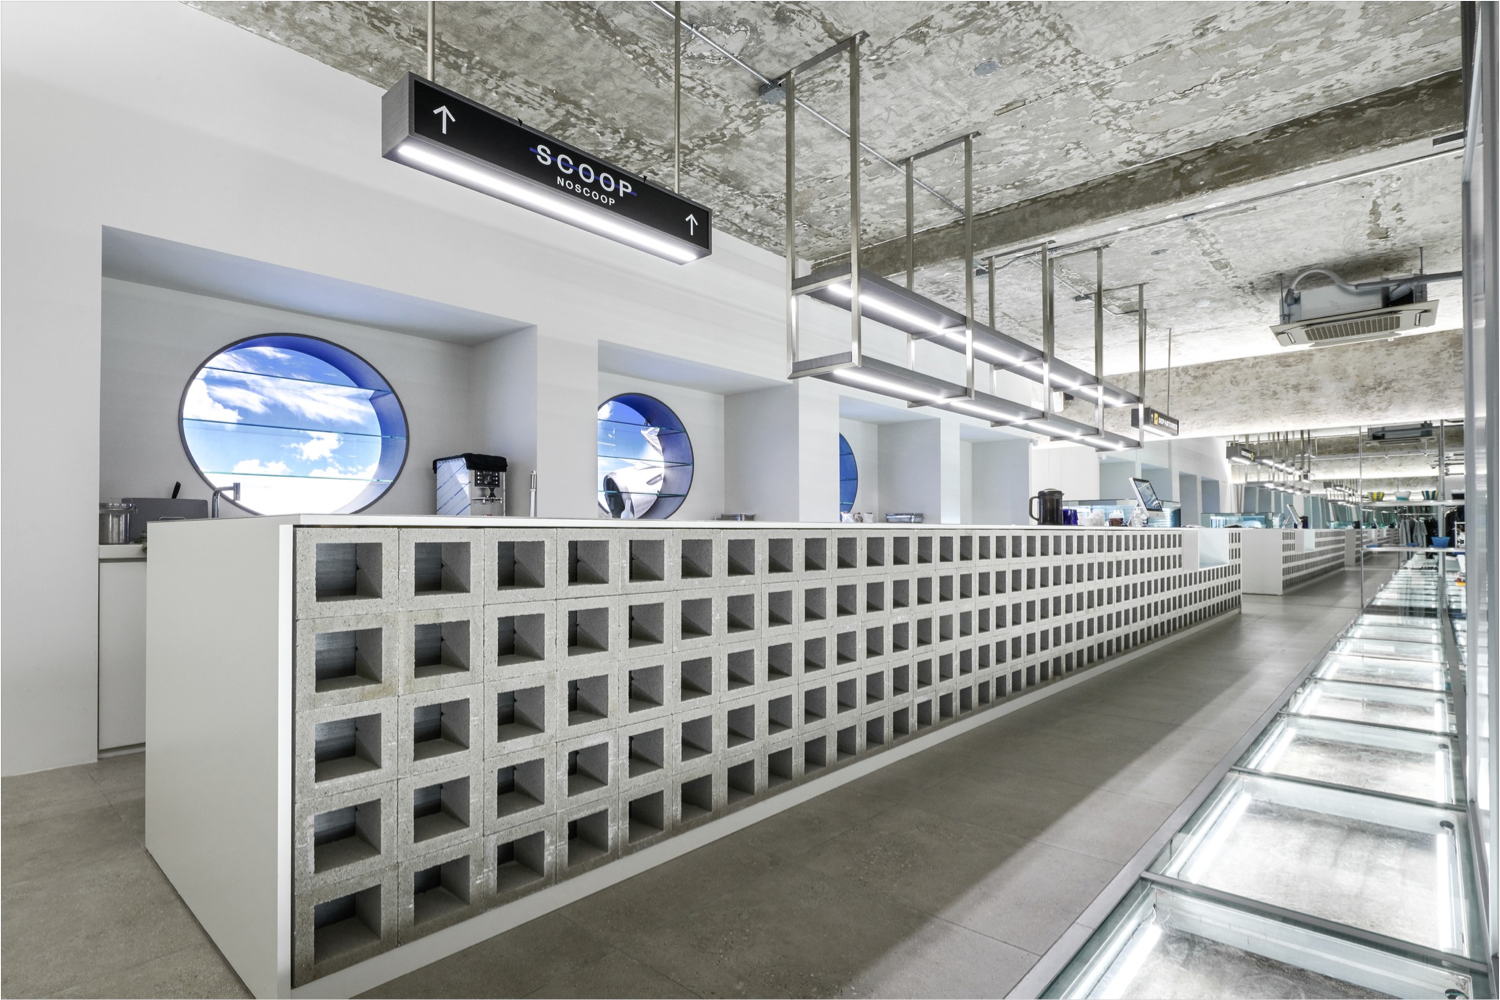 PAN AM's lifestyle brand opens a new flagship store in an old